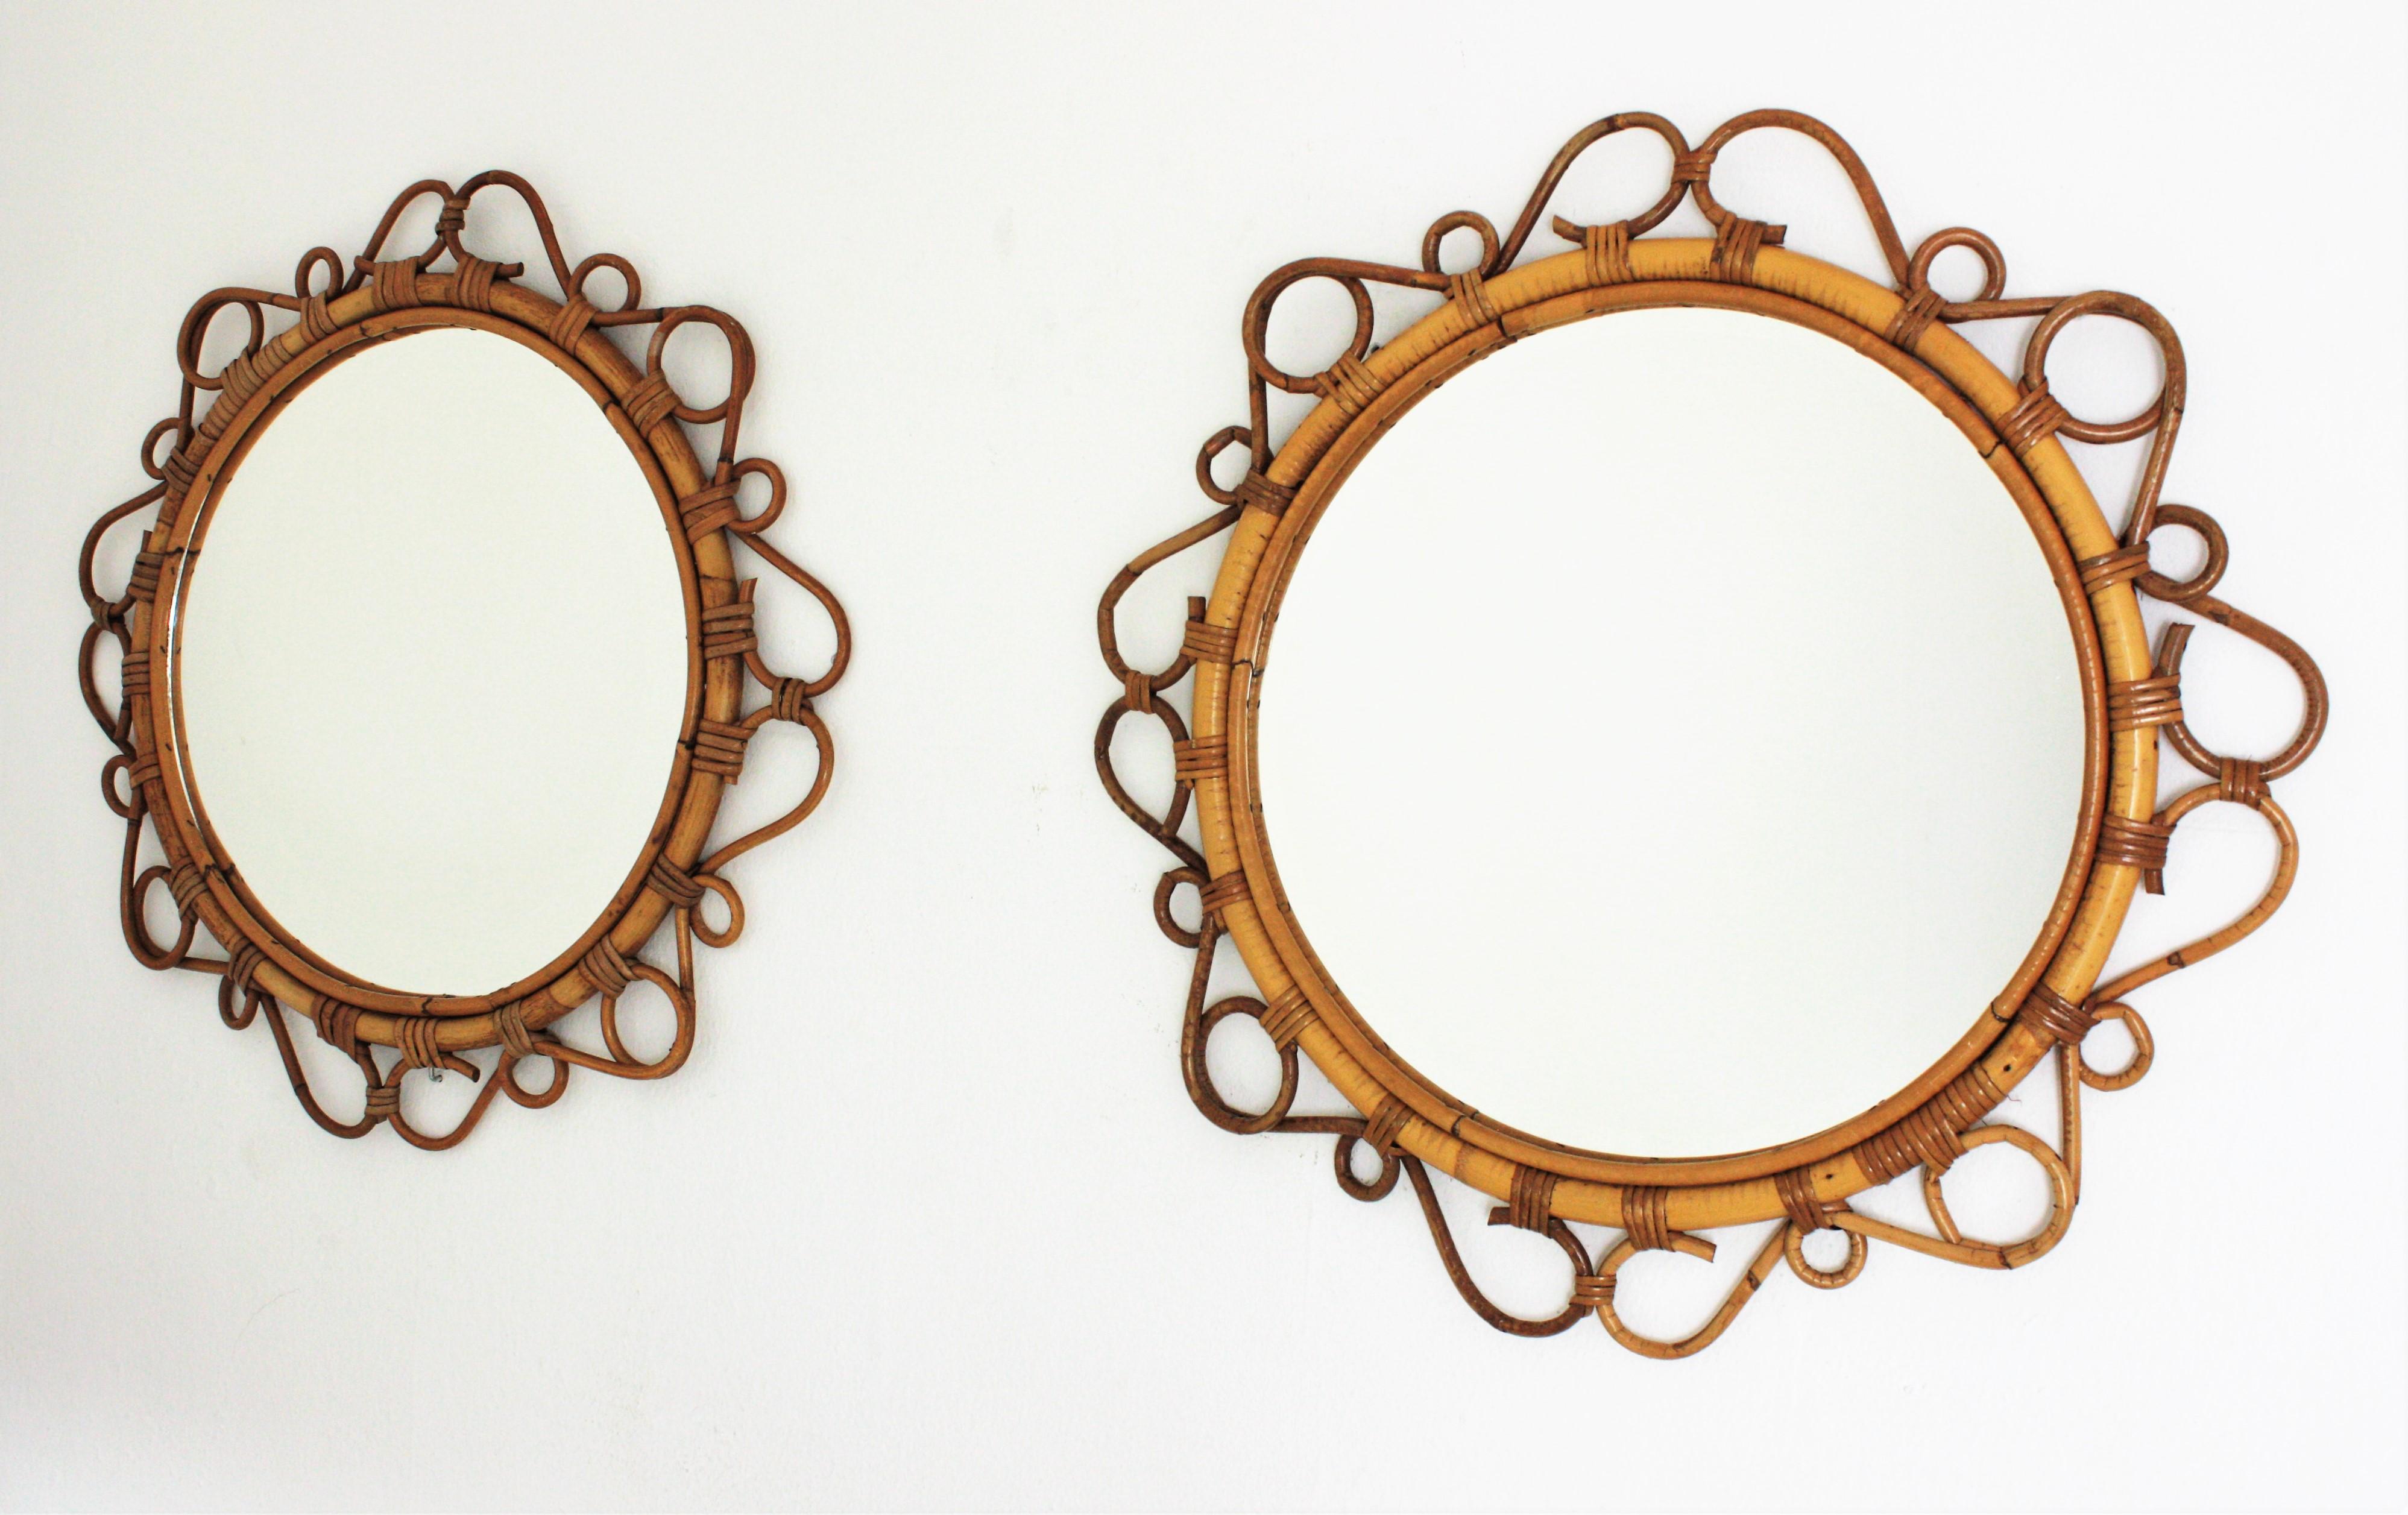 Cane Rattan Round Mirrors with Scroll Details, Pair